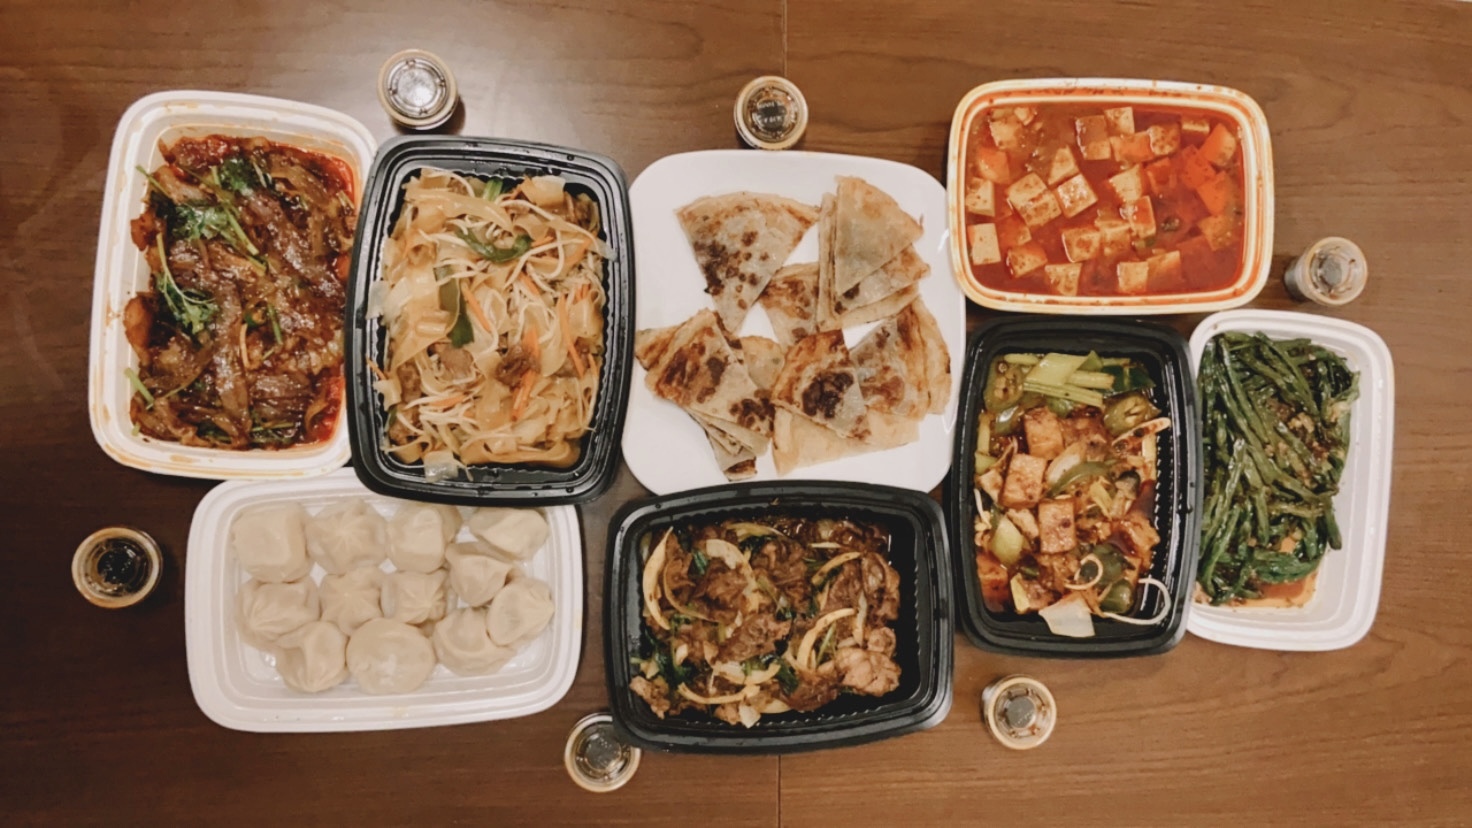 Being an international student means finding your own way to celebrate your culture and festivals. (Photo courtesy Michelle Liu)